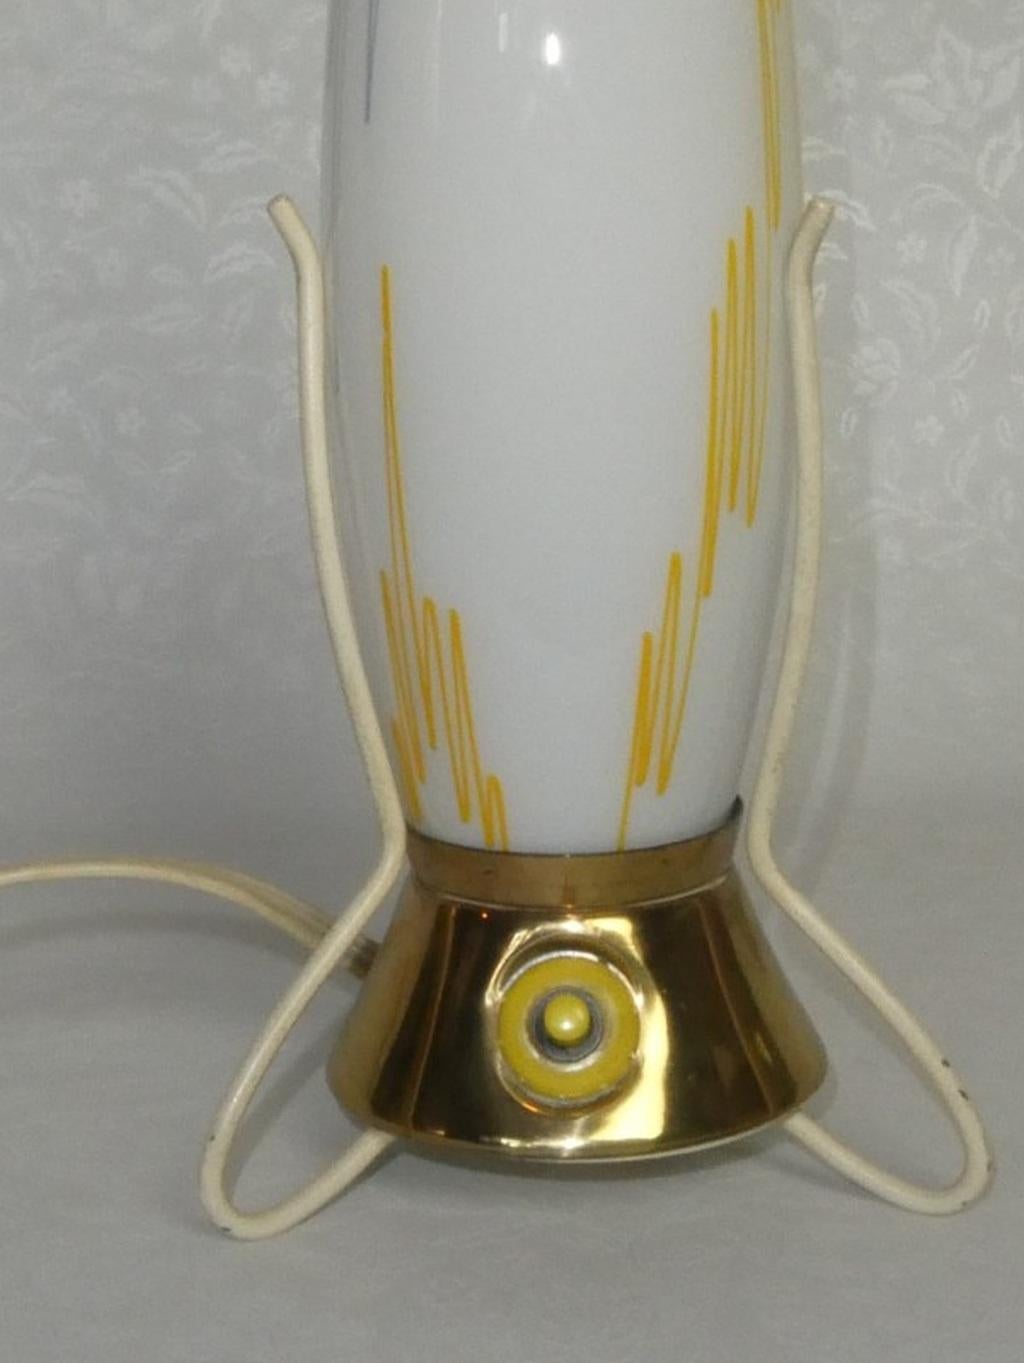 Mid-Century Modern Vintage Space Age Rocket Table Lamp by Leoš Nikel Zukov, 1950s For Sale